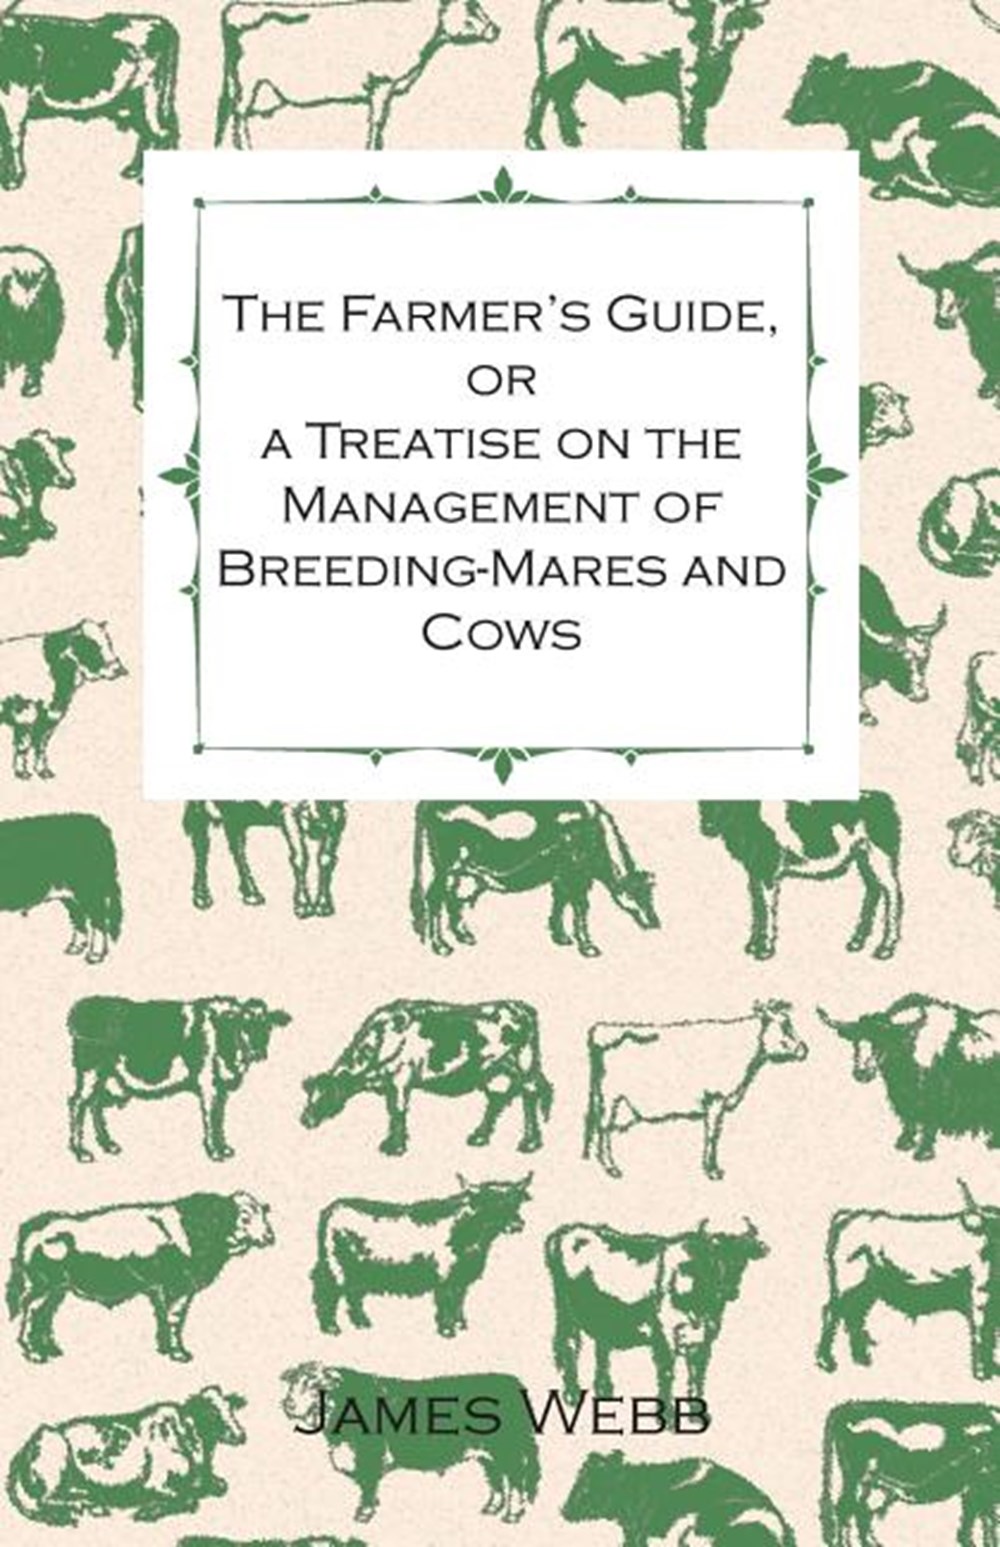 Farmer's Guide, or a Treatise on the Management of Breeding-Mares and Cows